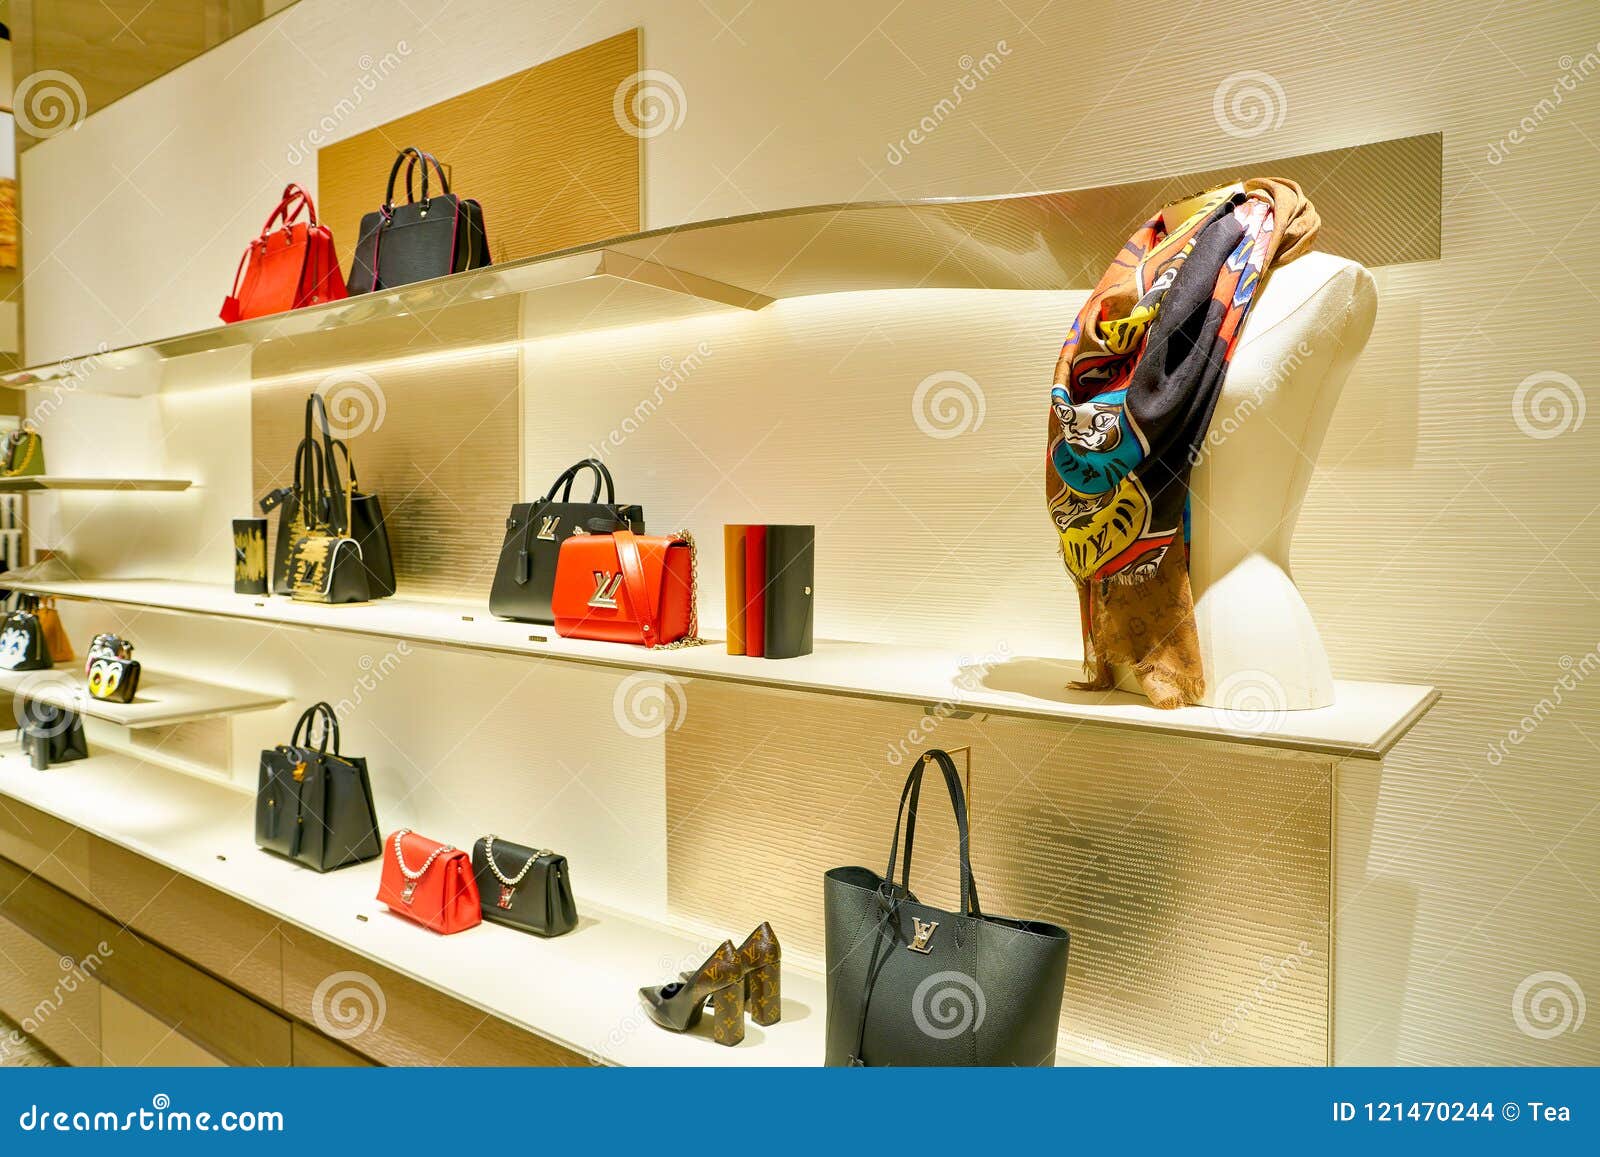 Louis Vuitton editorial stock image. Image of malletier - 121470244